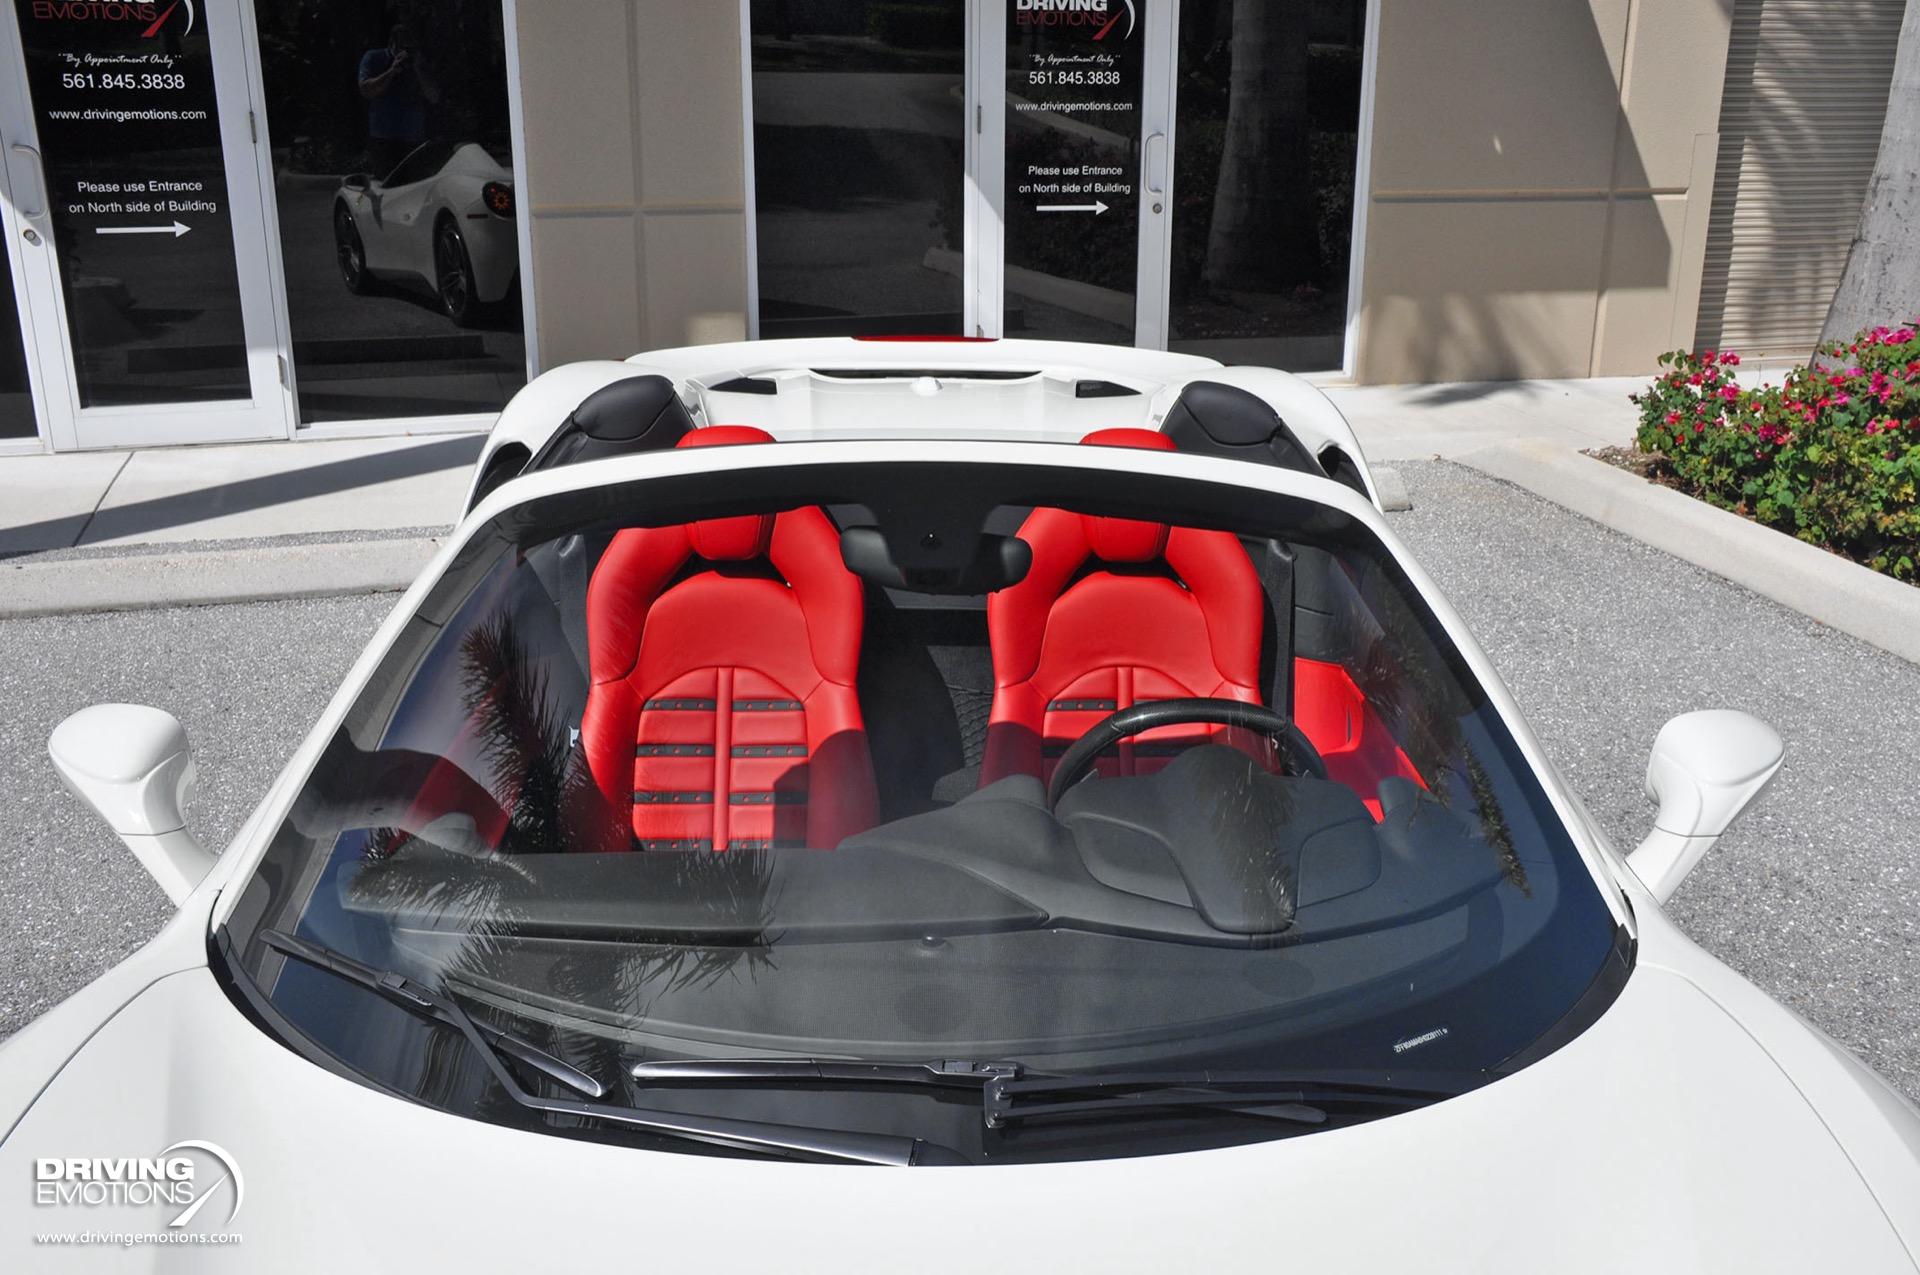 Used 2017 Ferrari 488 Spider WHITE/RED! LOADED! LOW MILES! COLLECTOR!! | Lake Park, FL